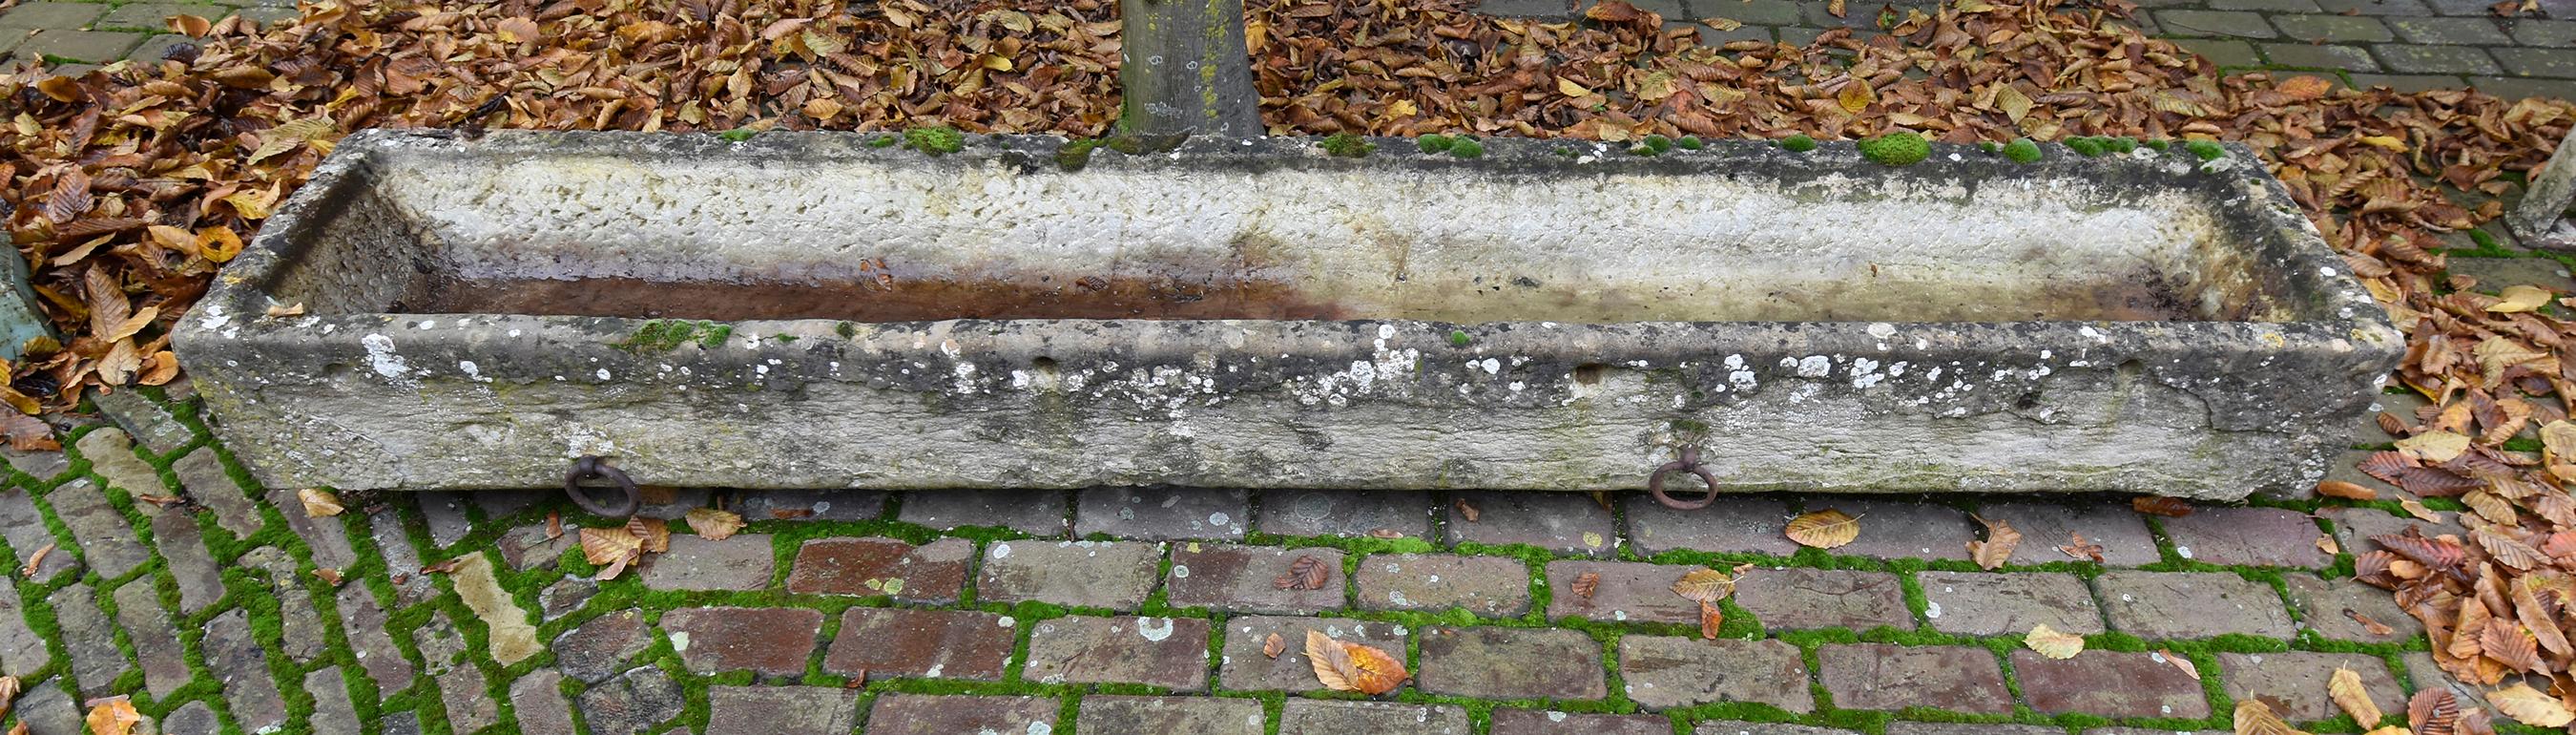 Antique stone trough from the 19th century.
Recuperated from a mansion near Brussels, Belgium.